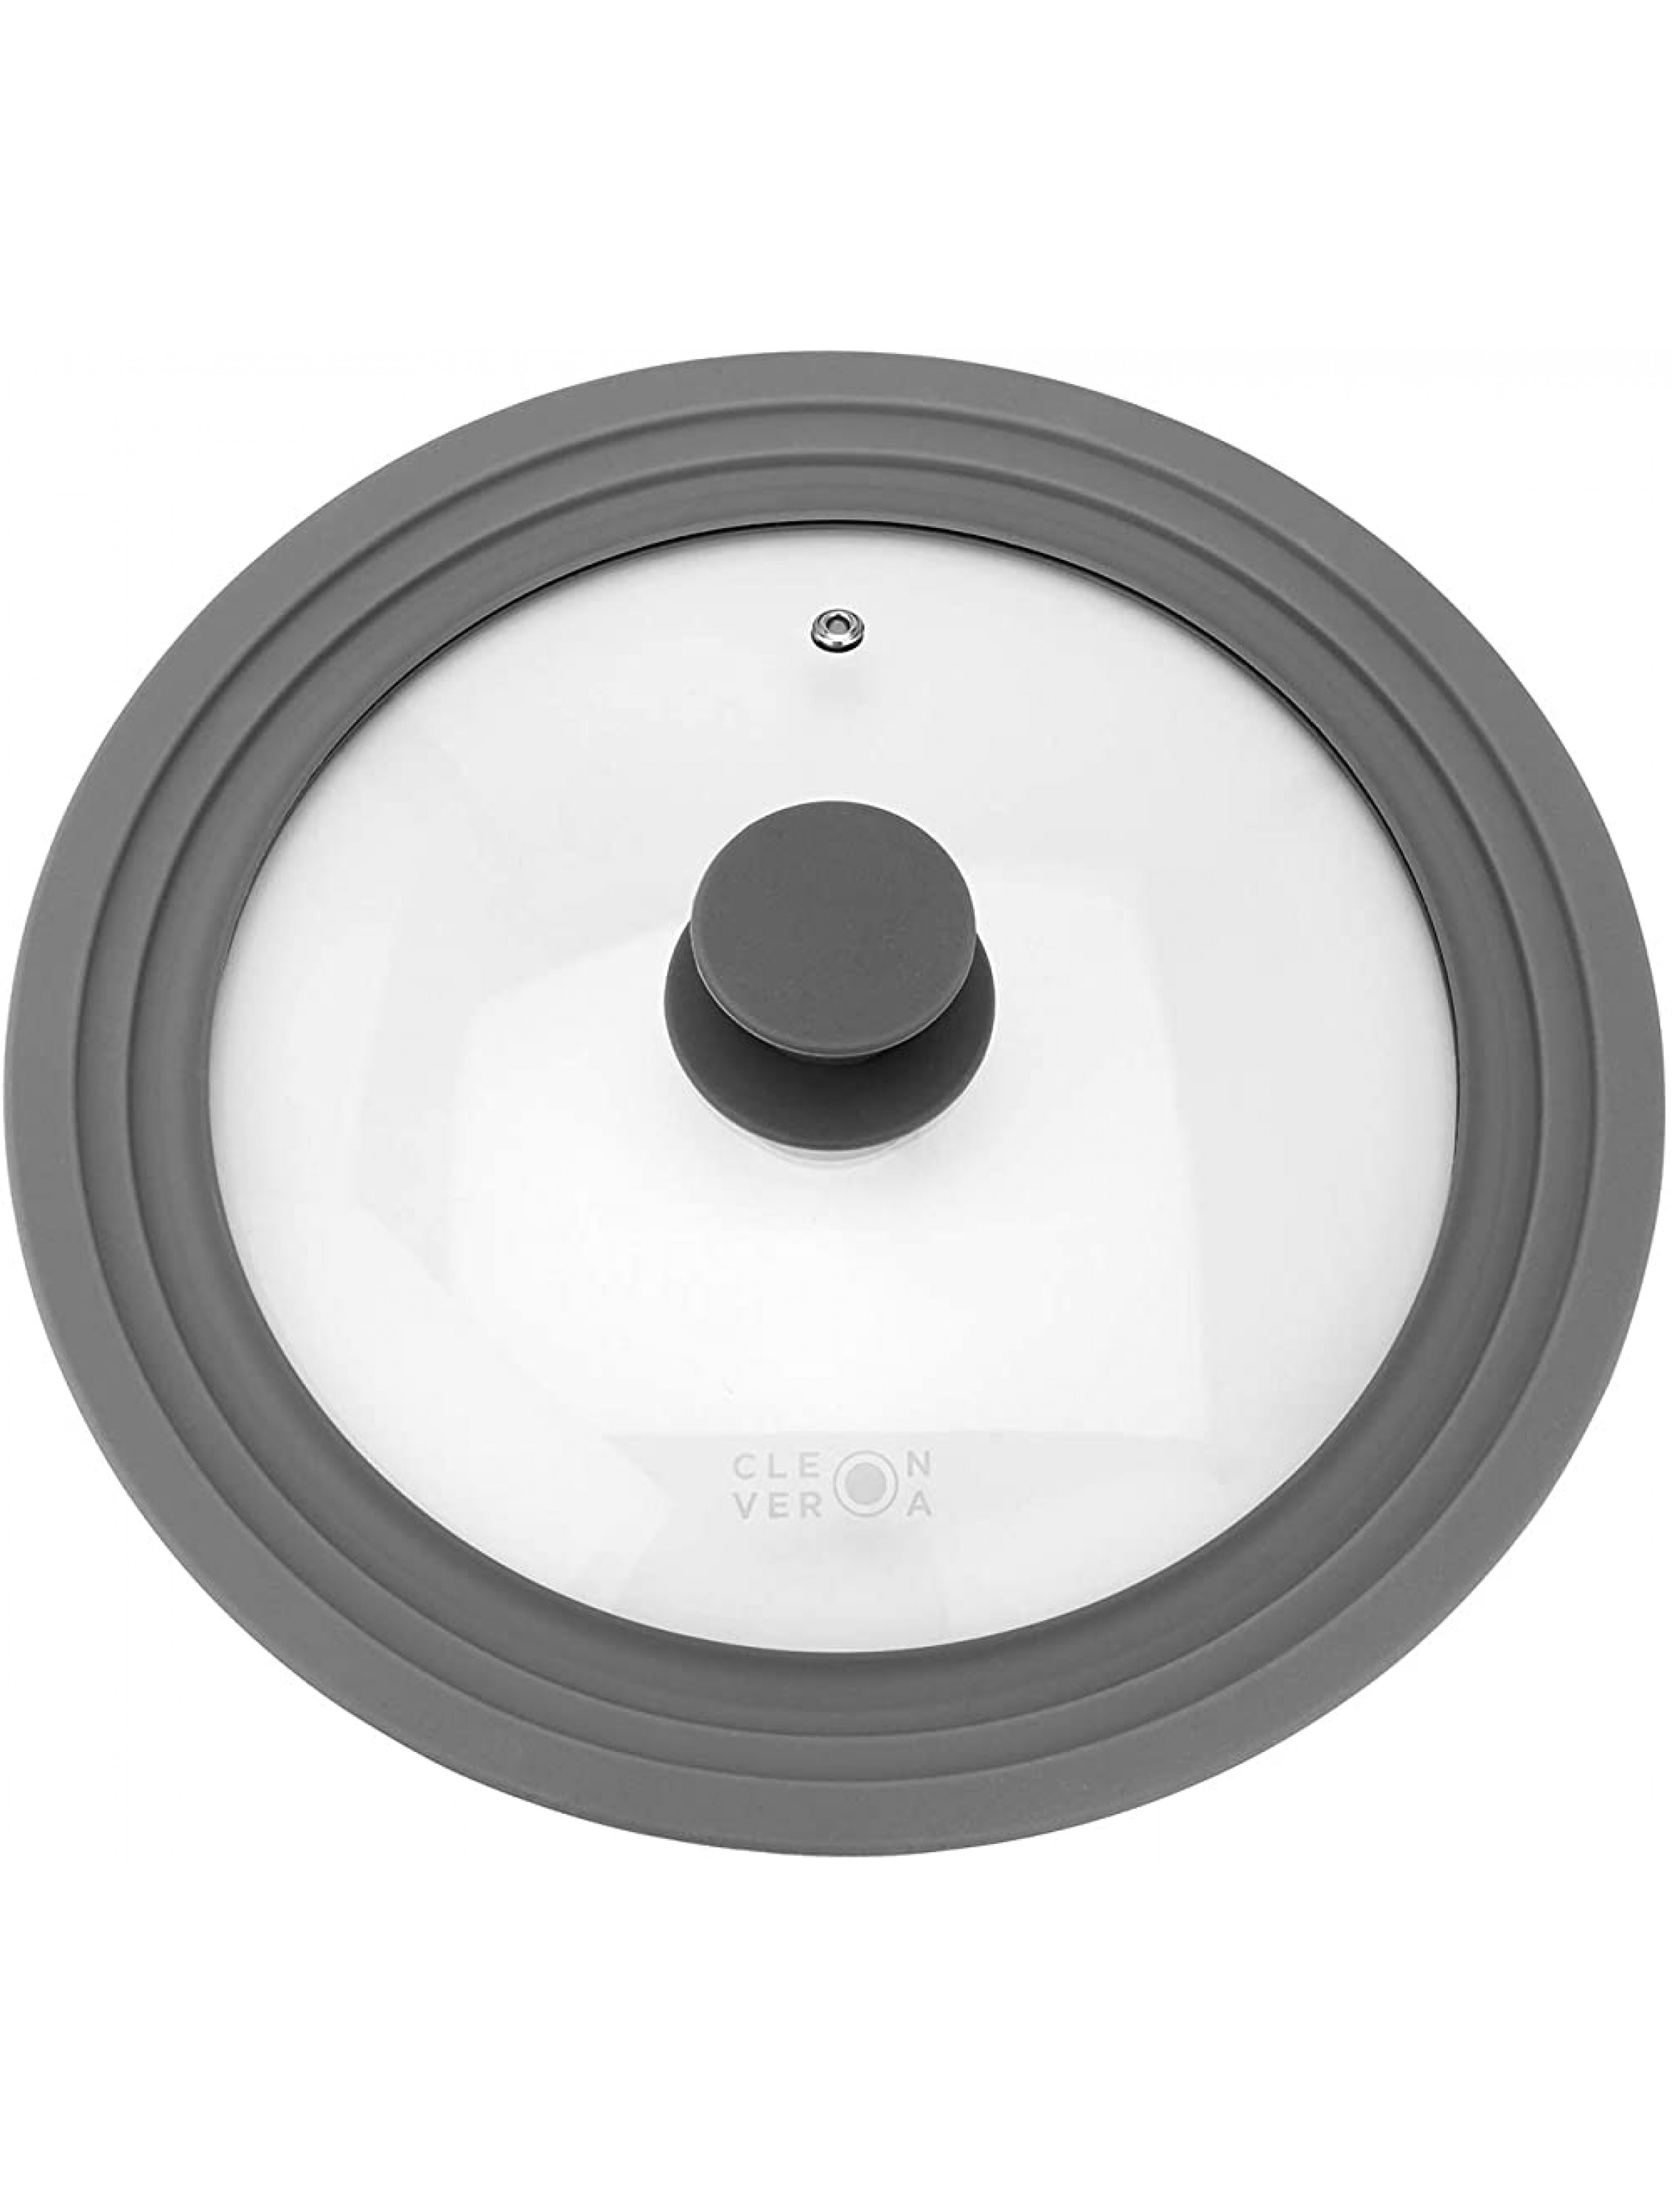 Cleverona Clever Lid Universal Pot and Pan Lid Extra Large fits 11 12 and 12.5 inch Pans Dark Grey - B9RH698Q3